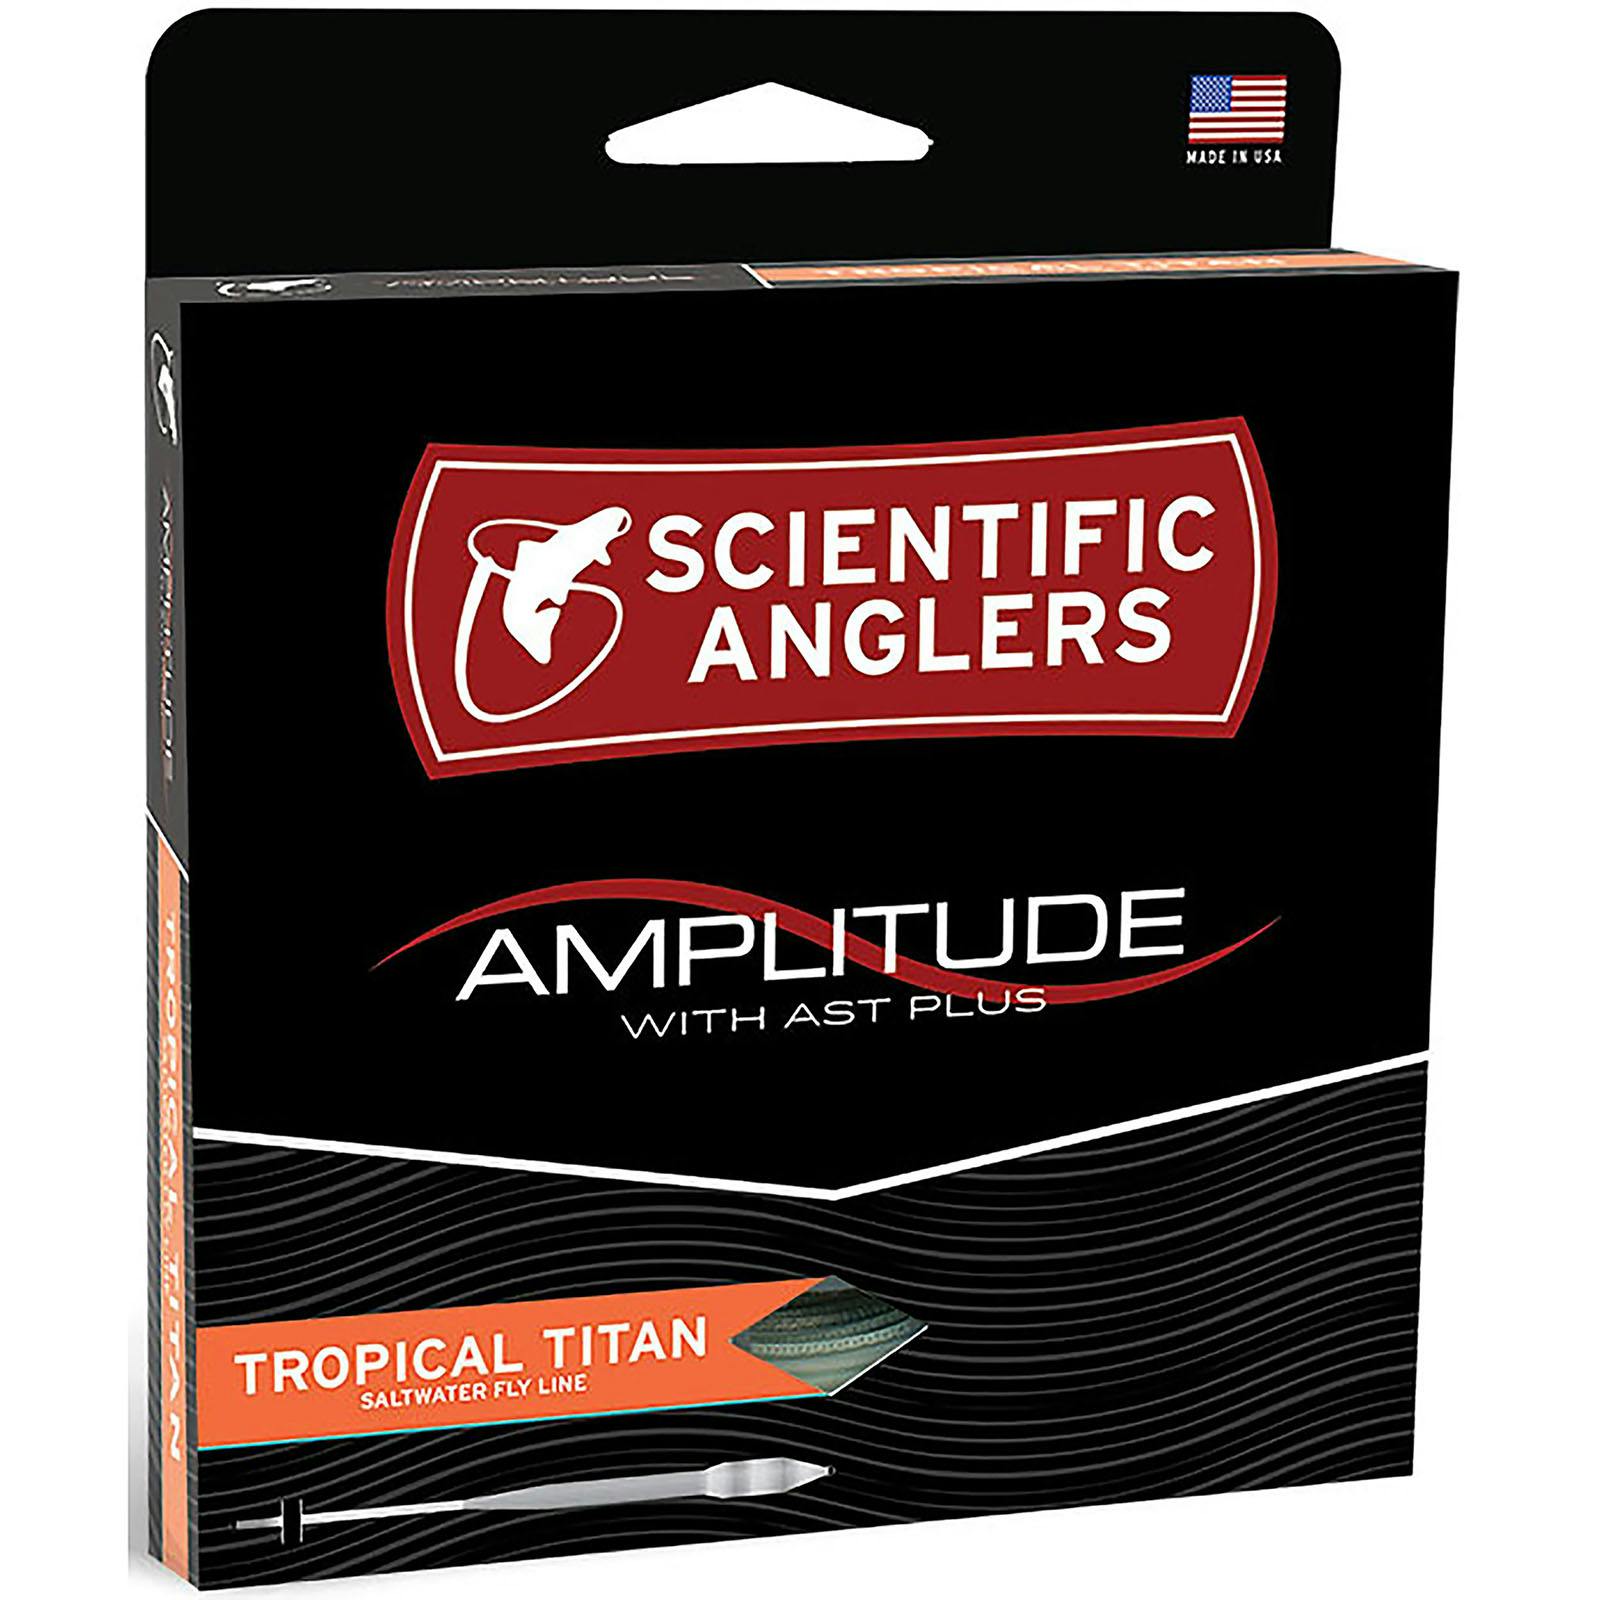 Scientific Anglers Amplitude Smooth Titan Long Freshwater Fly Line · WF · 6 wt · Floating · Sage - Moss - Dark Olive